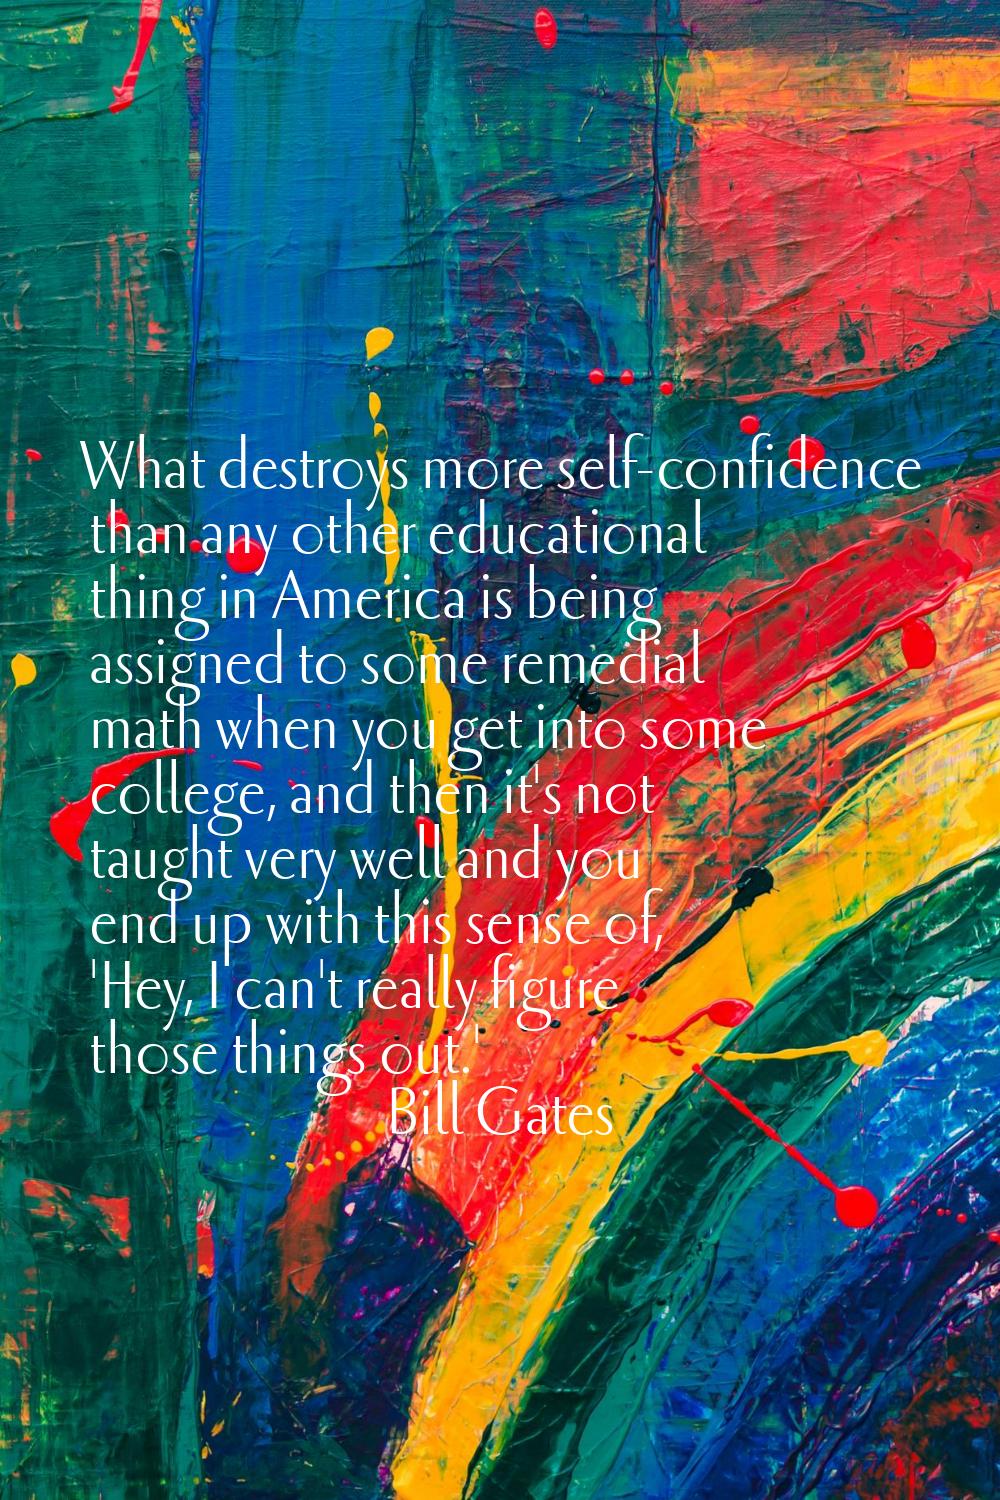 What destroys more self-confidence than any other educational thing in America is being assigned to